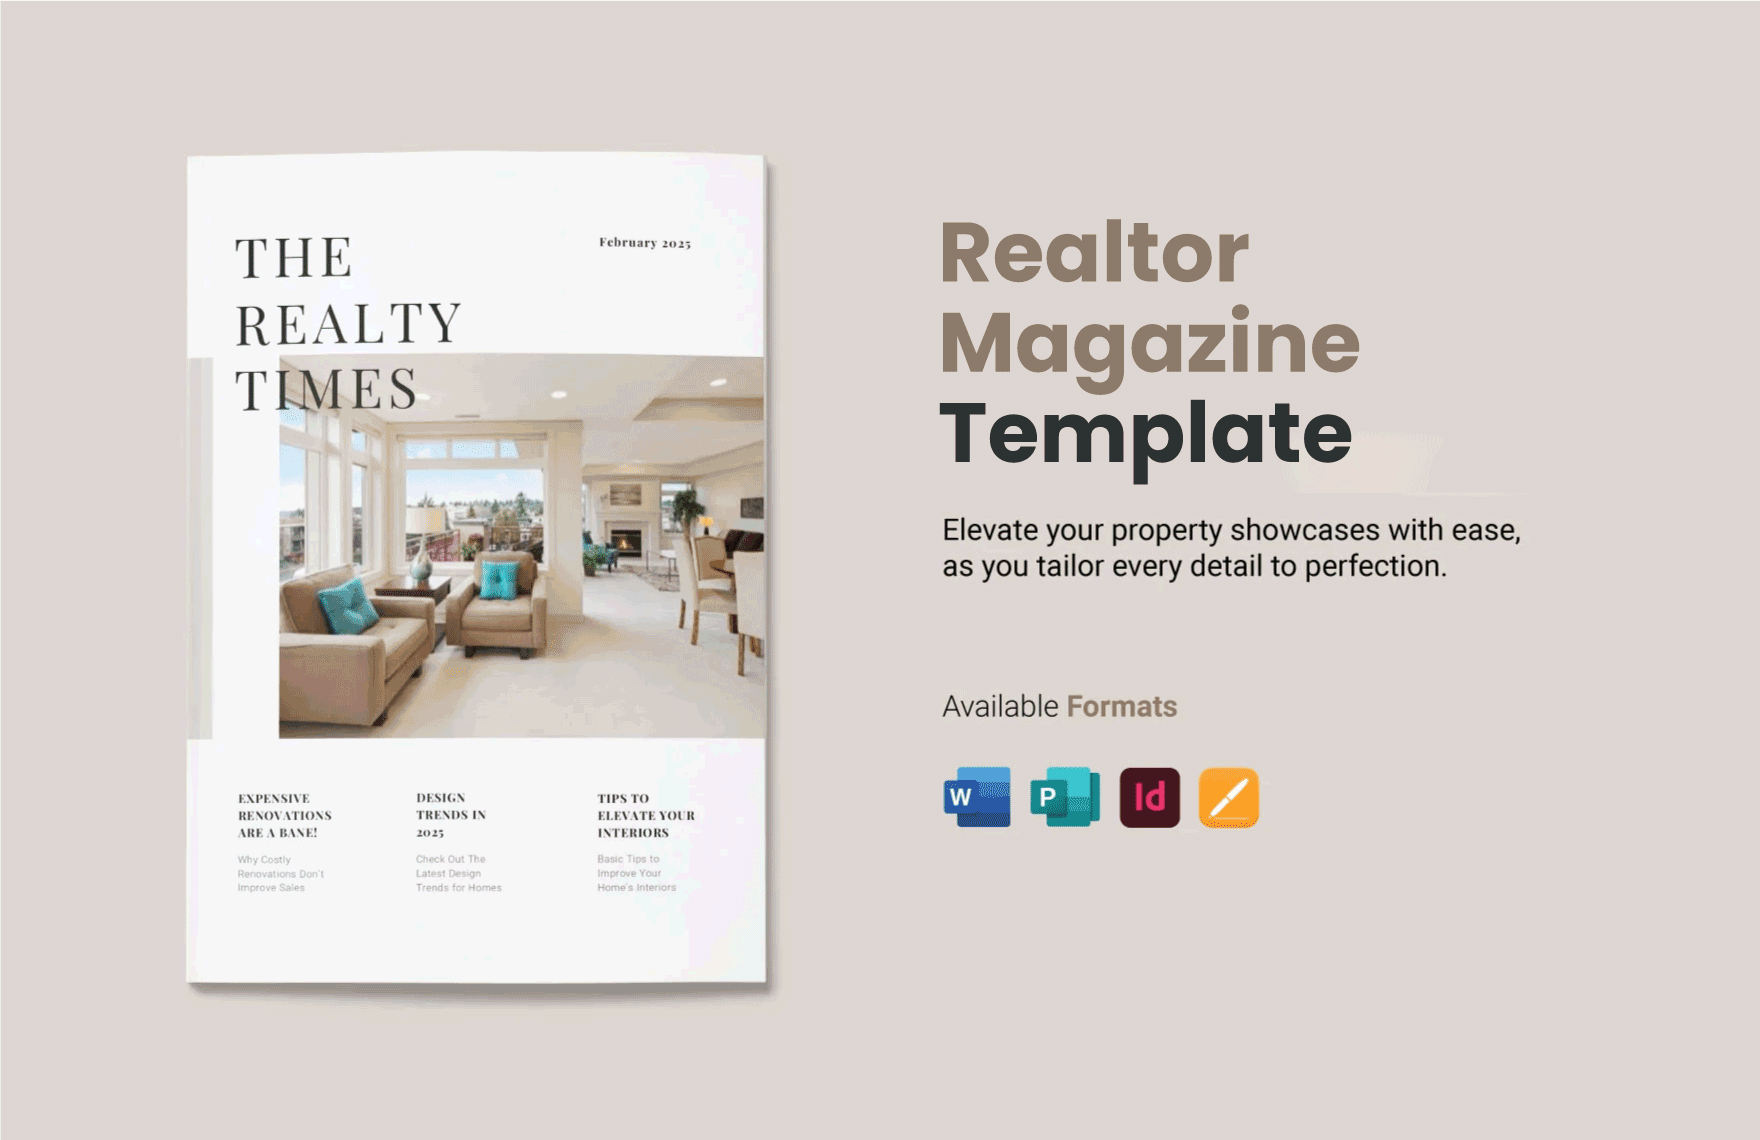 Free Realtor Magazine Template in Word, Apple Pages, Publisher, InDesign